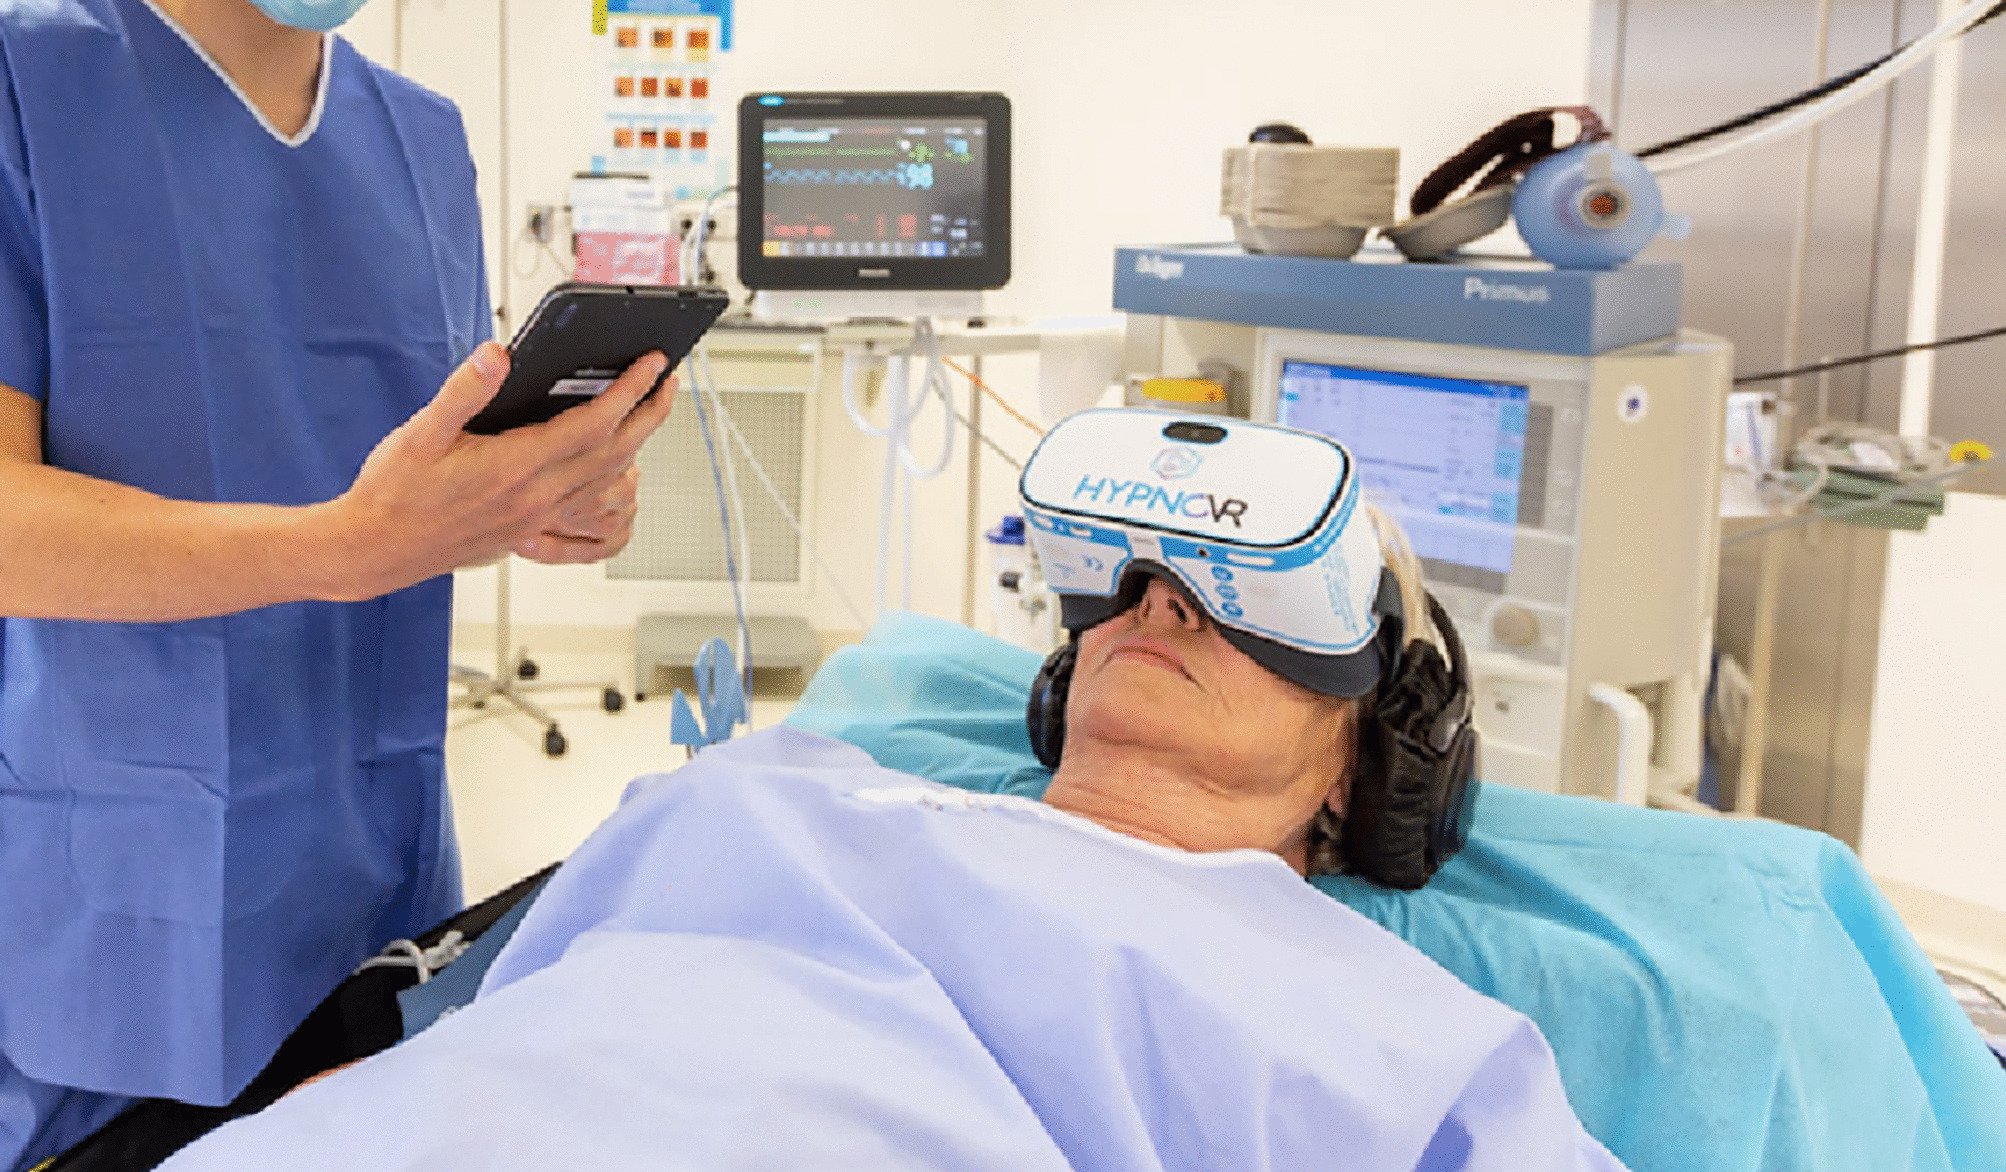 Variations of the Relative Parasympathetic Tone Assessed by ANI During Oocyte Retrieval Under Local Anaesthesia with Virtual Reality : A Randomized, Controlled, Monocentric, Open Study